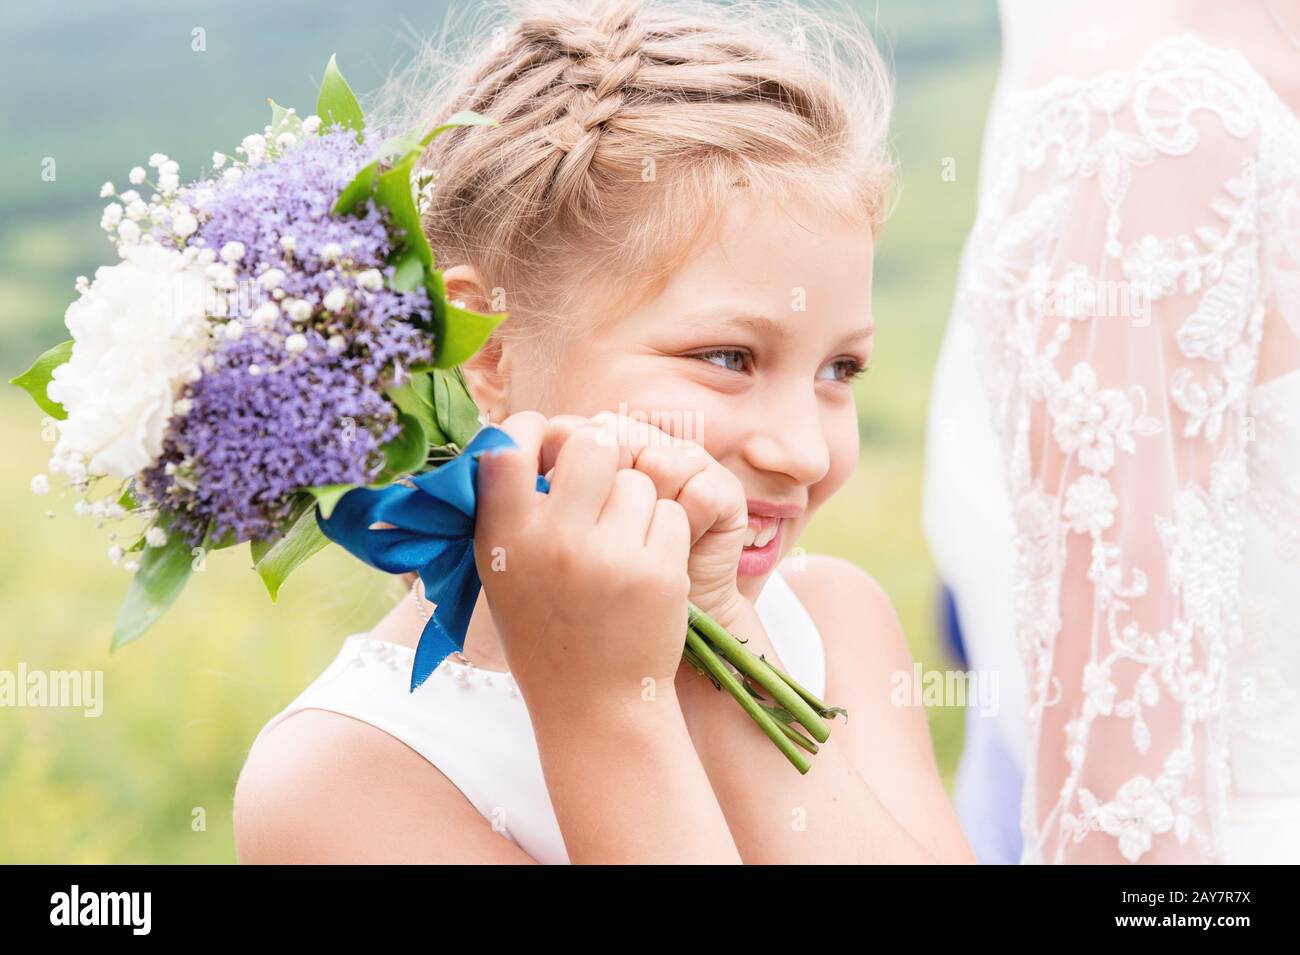 A cute little touching child and an amazing wedding bouquet of white and purple peonies at her parents' wedding Stock Photo